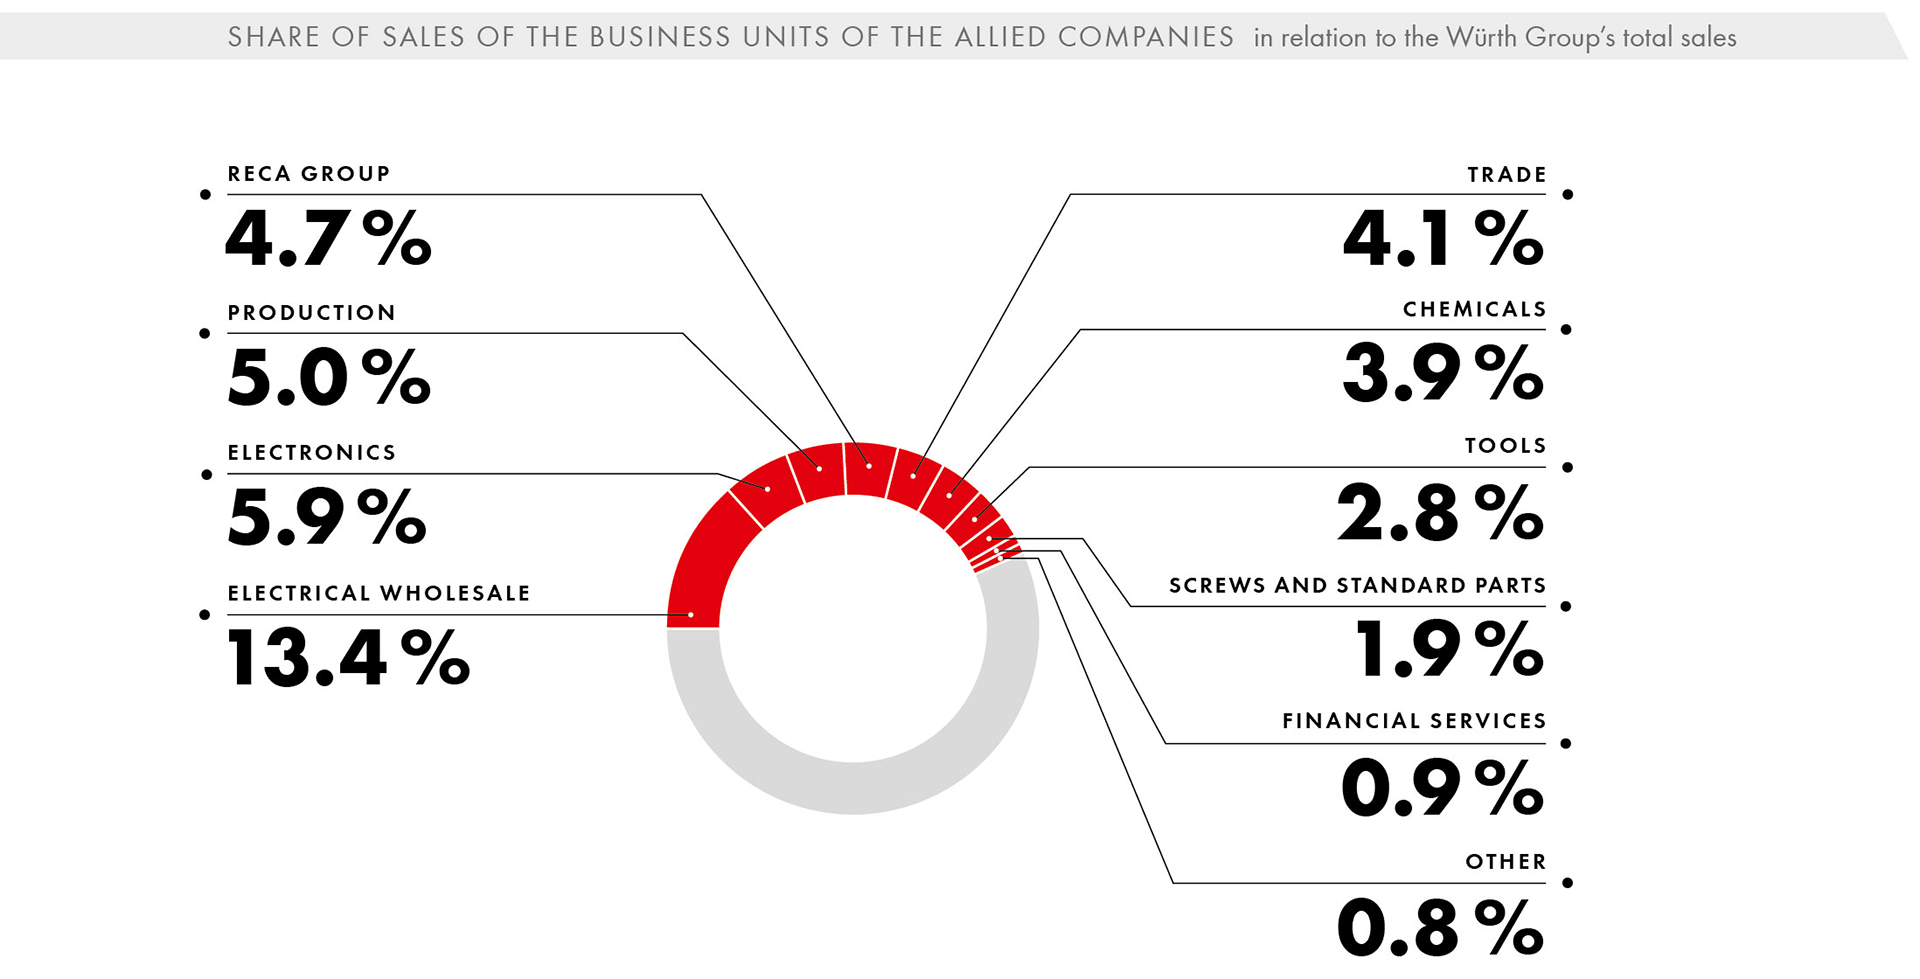 Share of sales of the business units of the Allied Companies  in relation to the Würth Group’s total sales